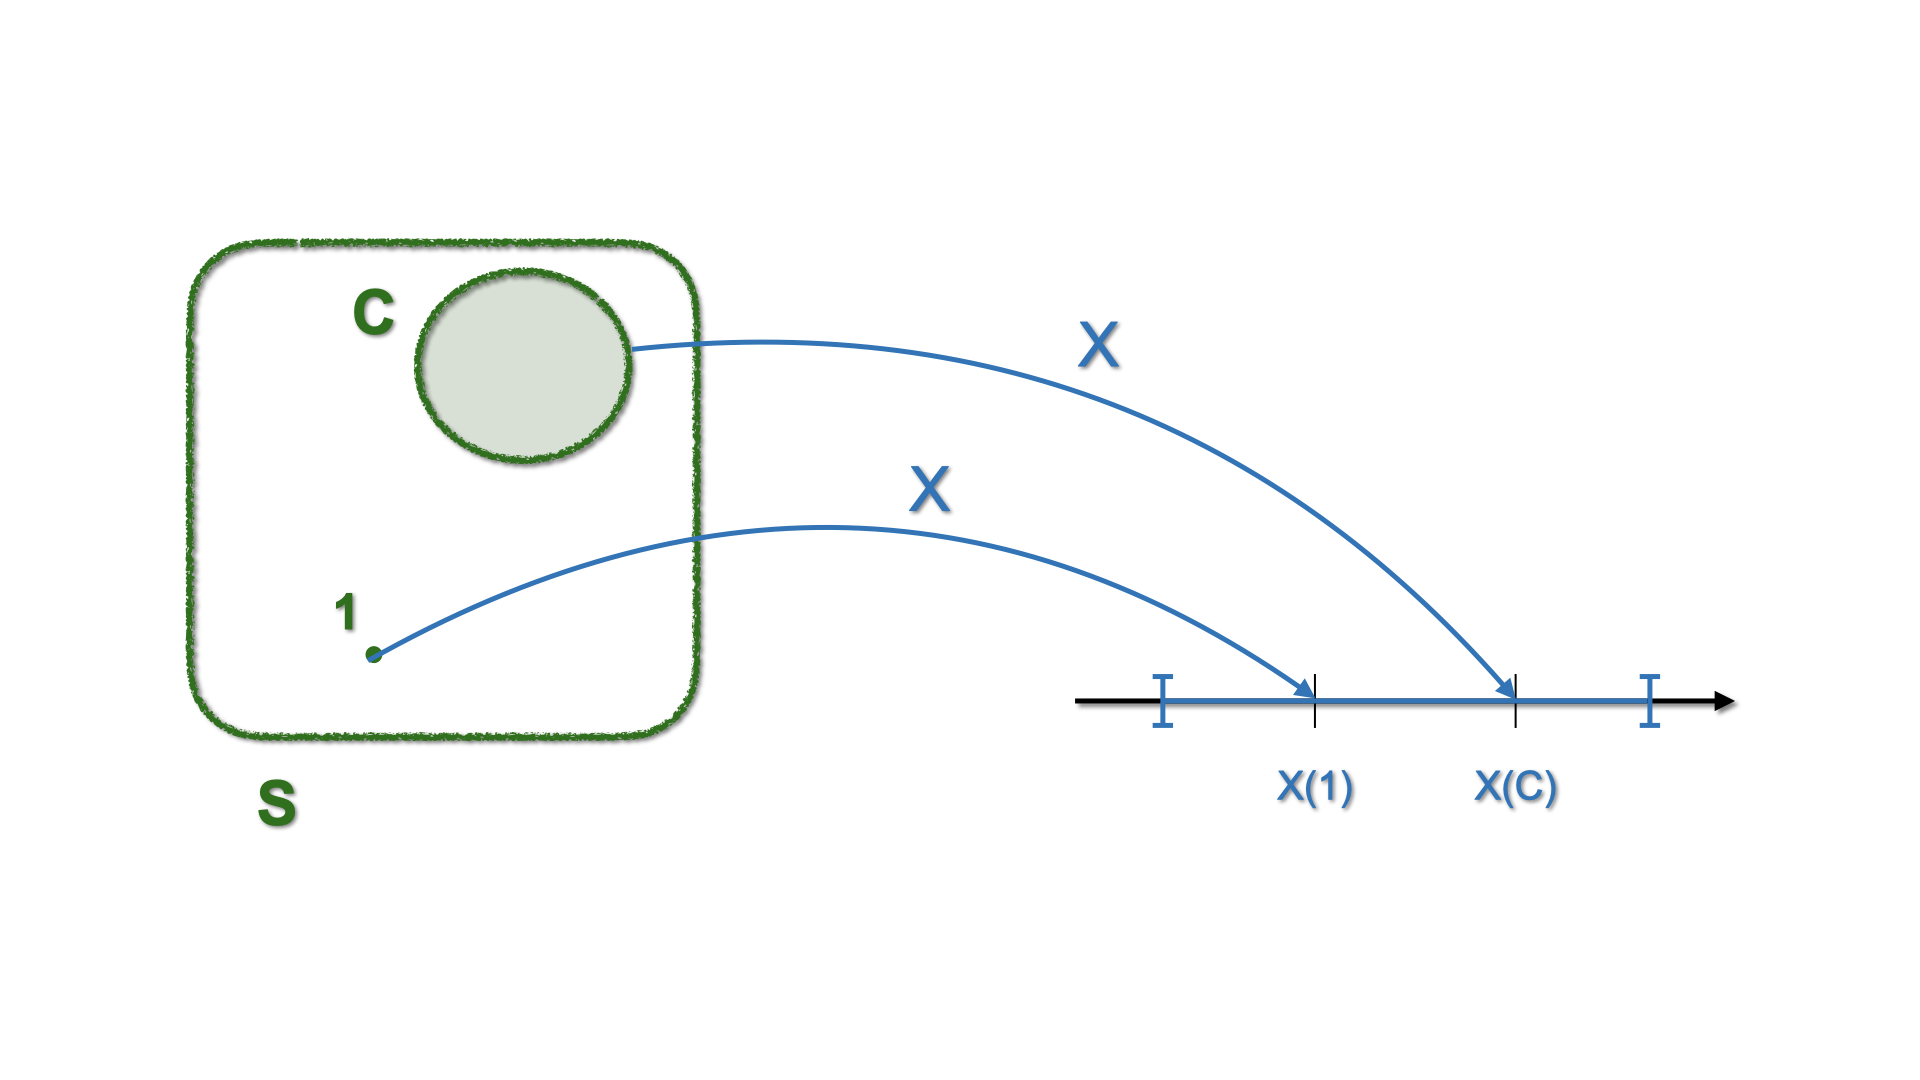 Schematic representation of mapping with a Random Variable